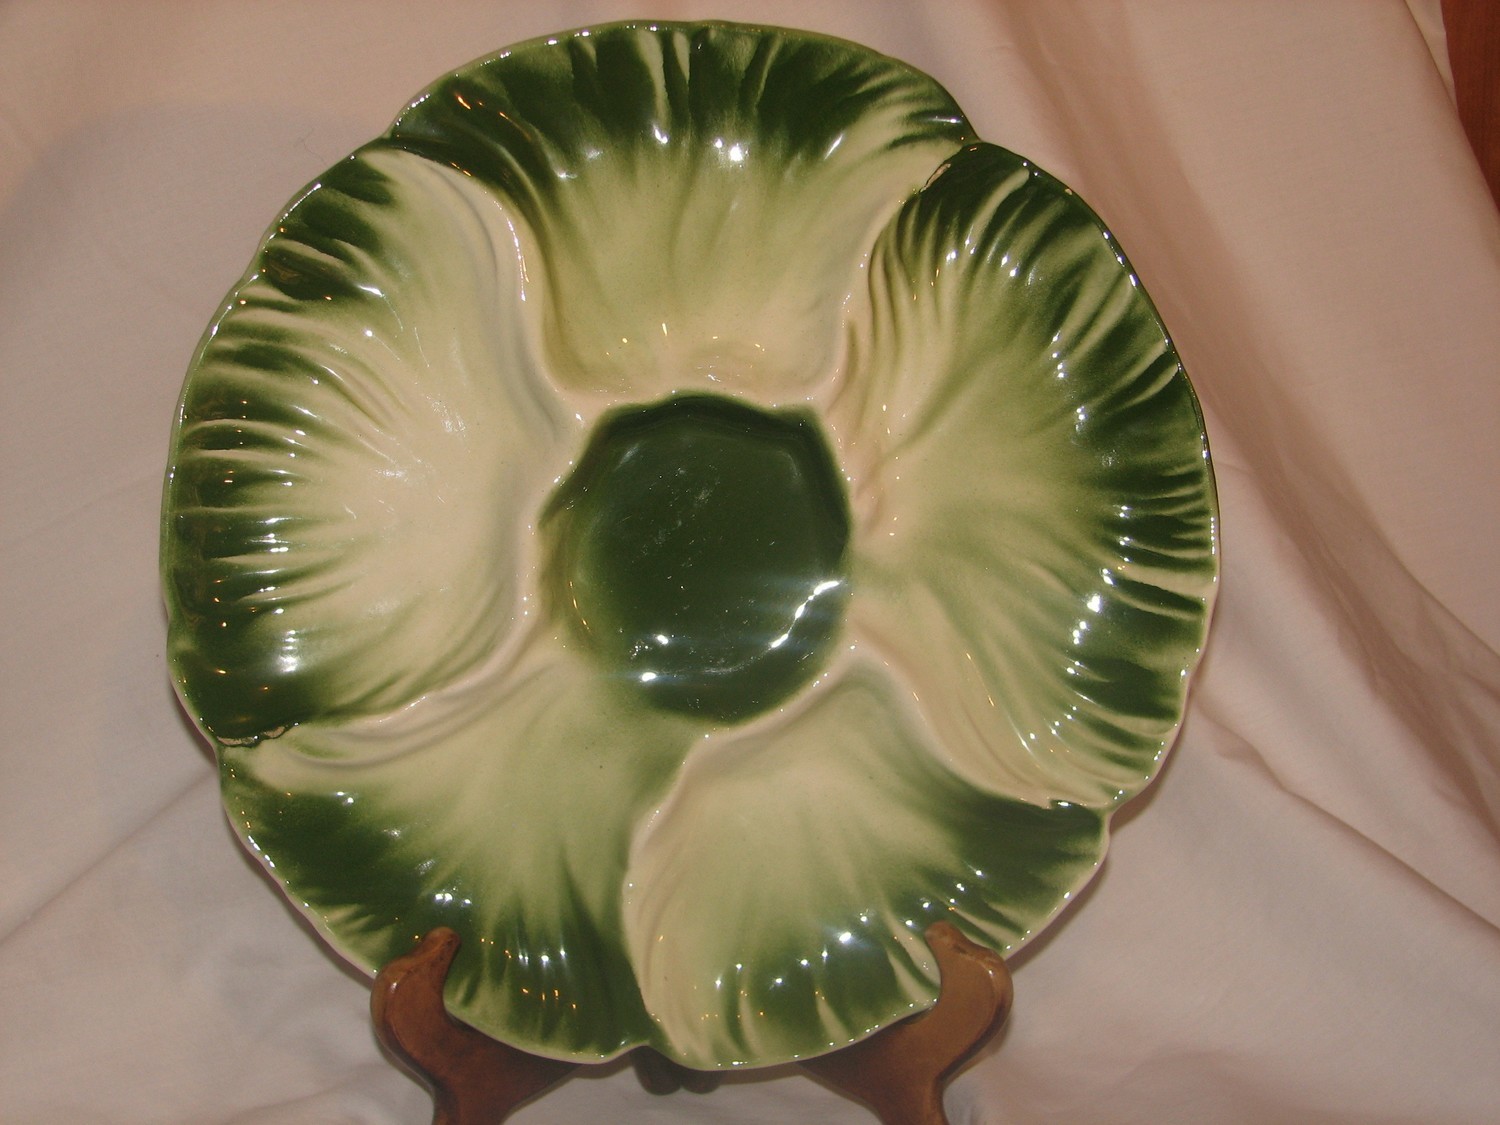 Vegetable Serving Tray, Cabbage Leaf, Green & White 11.75" Diameter